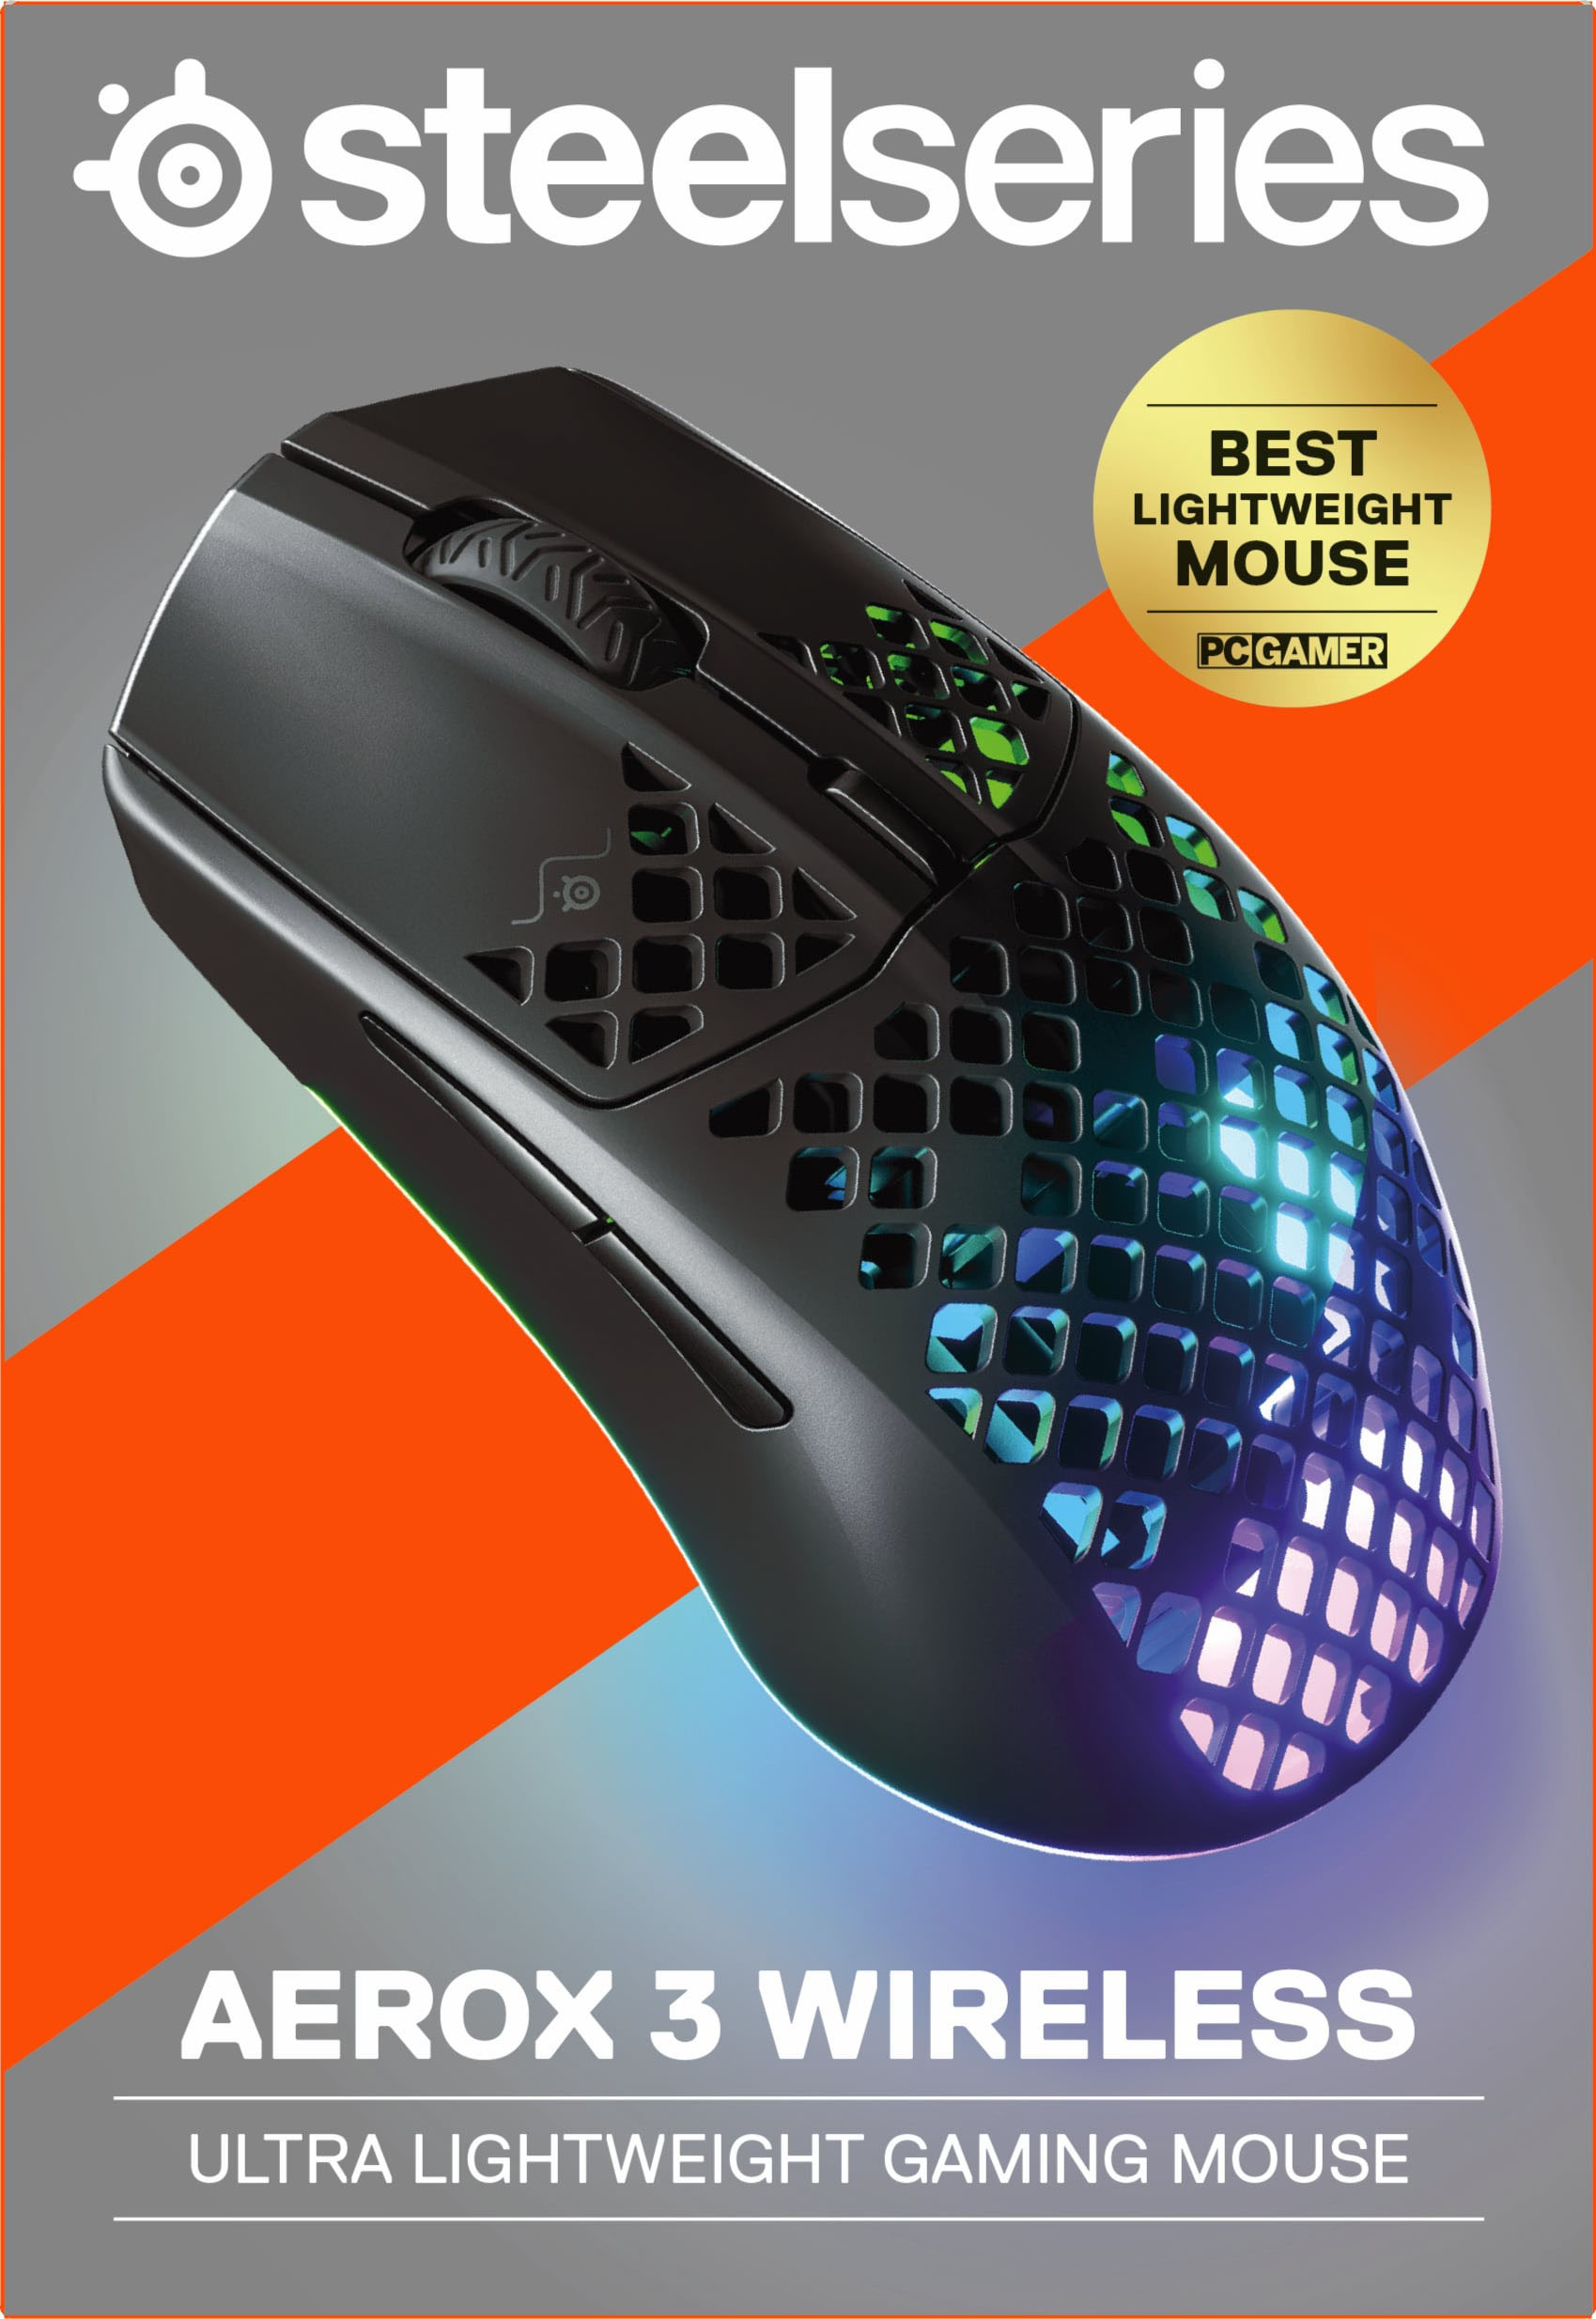 Onyx Buy Mouse Honeycomb - Light Super Optical Aerox Best Gaming 3 62612 RGB SteelSeries Wireless